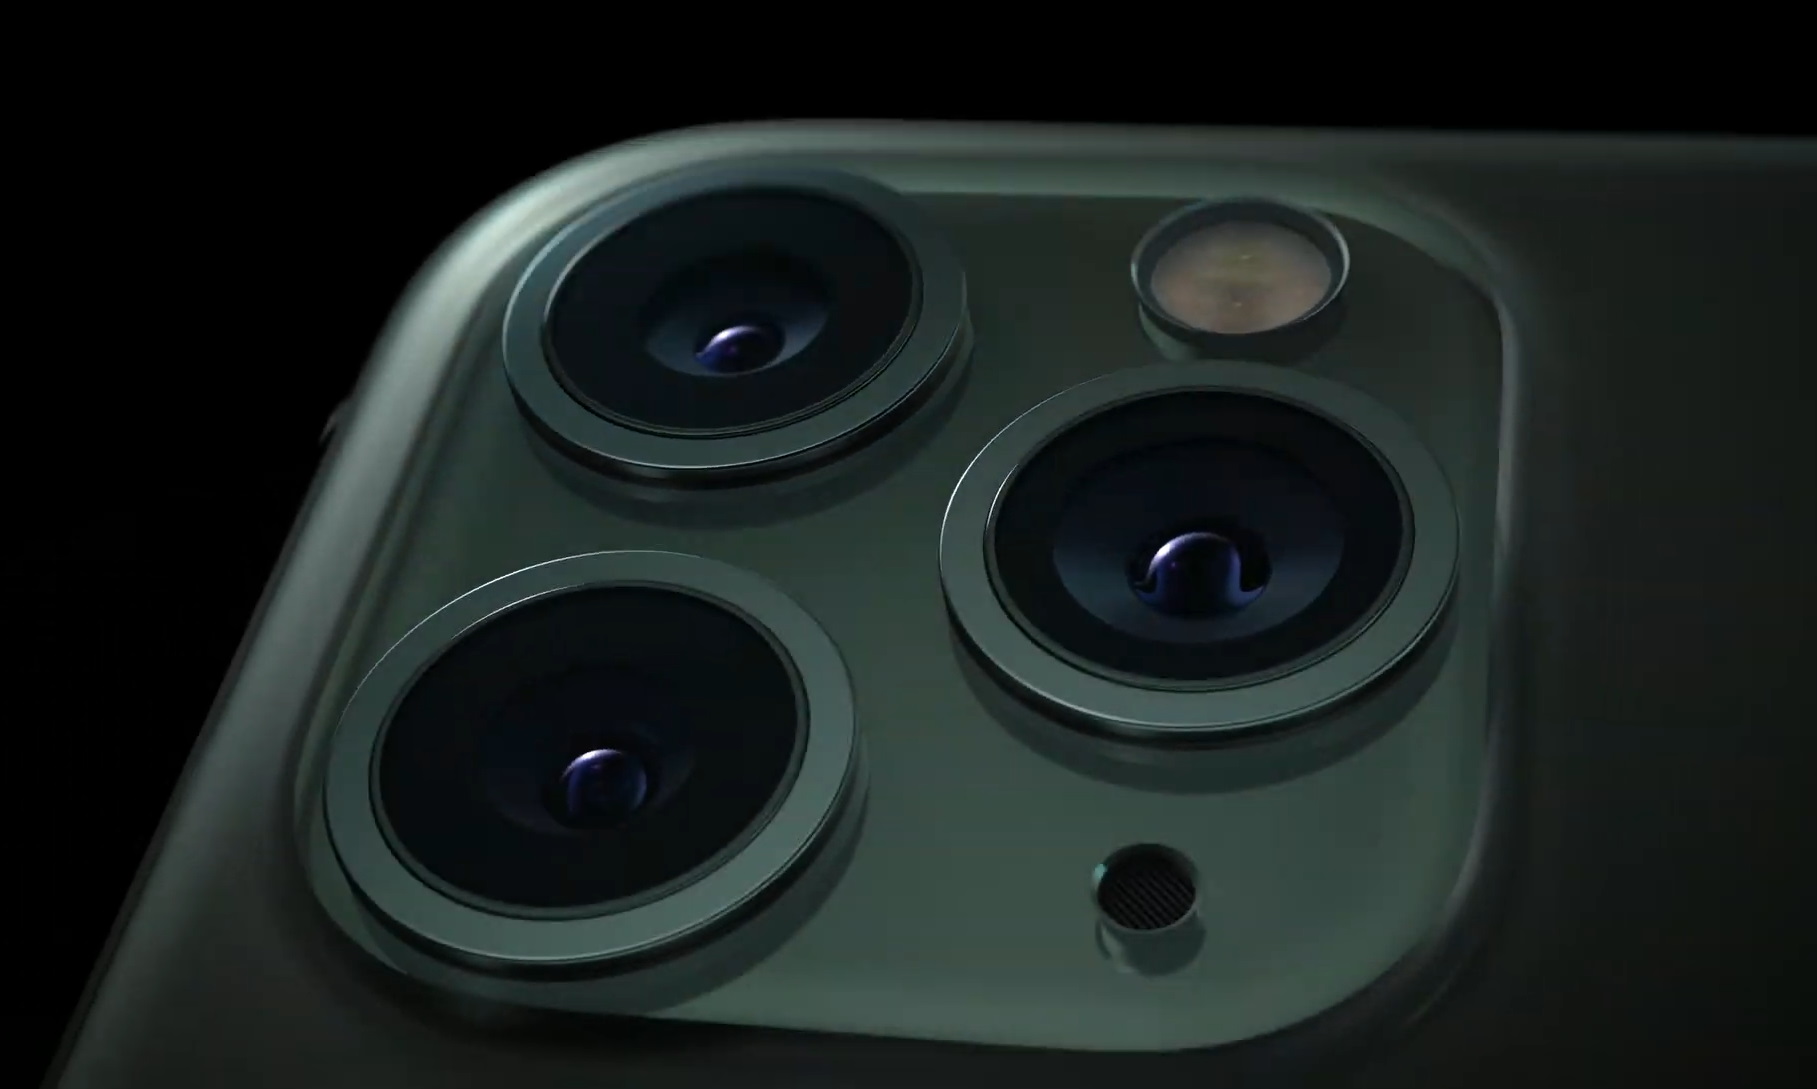 Why the new iPhone 11 Pro have 3 cameras? | TechCrunch